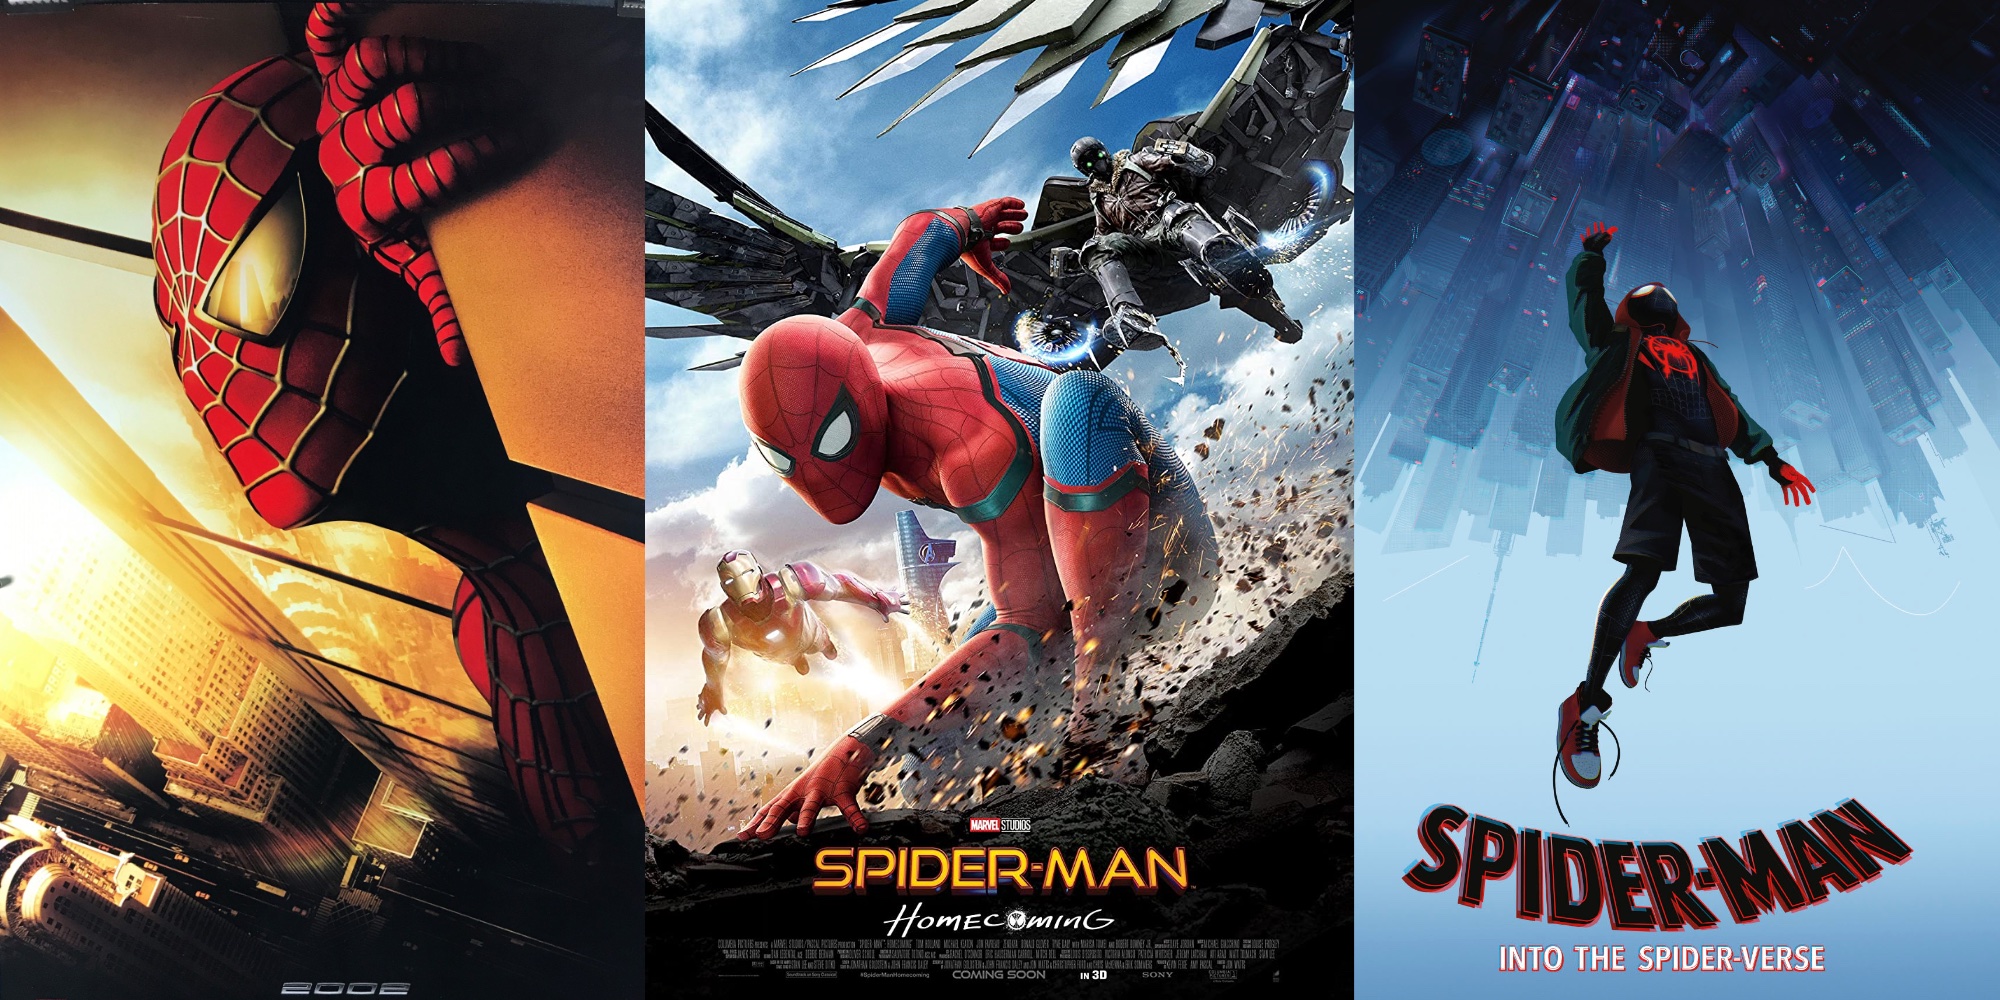 Apple launches $10 Spider-Man movie sale alongside $1 HD rental and more